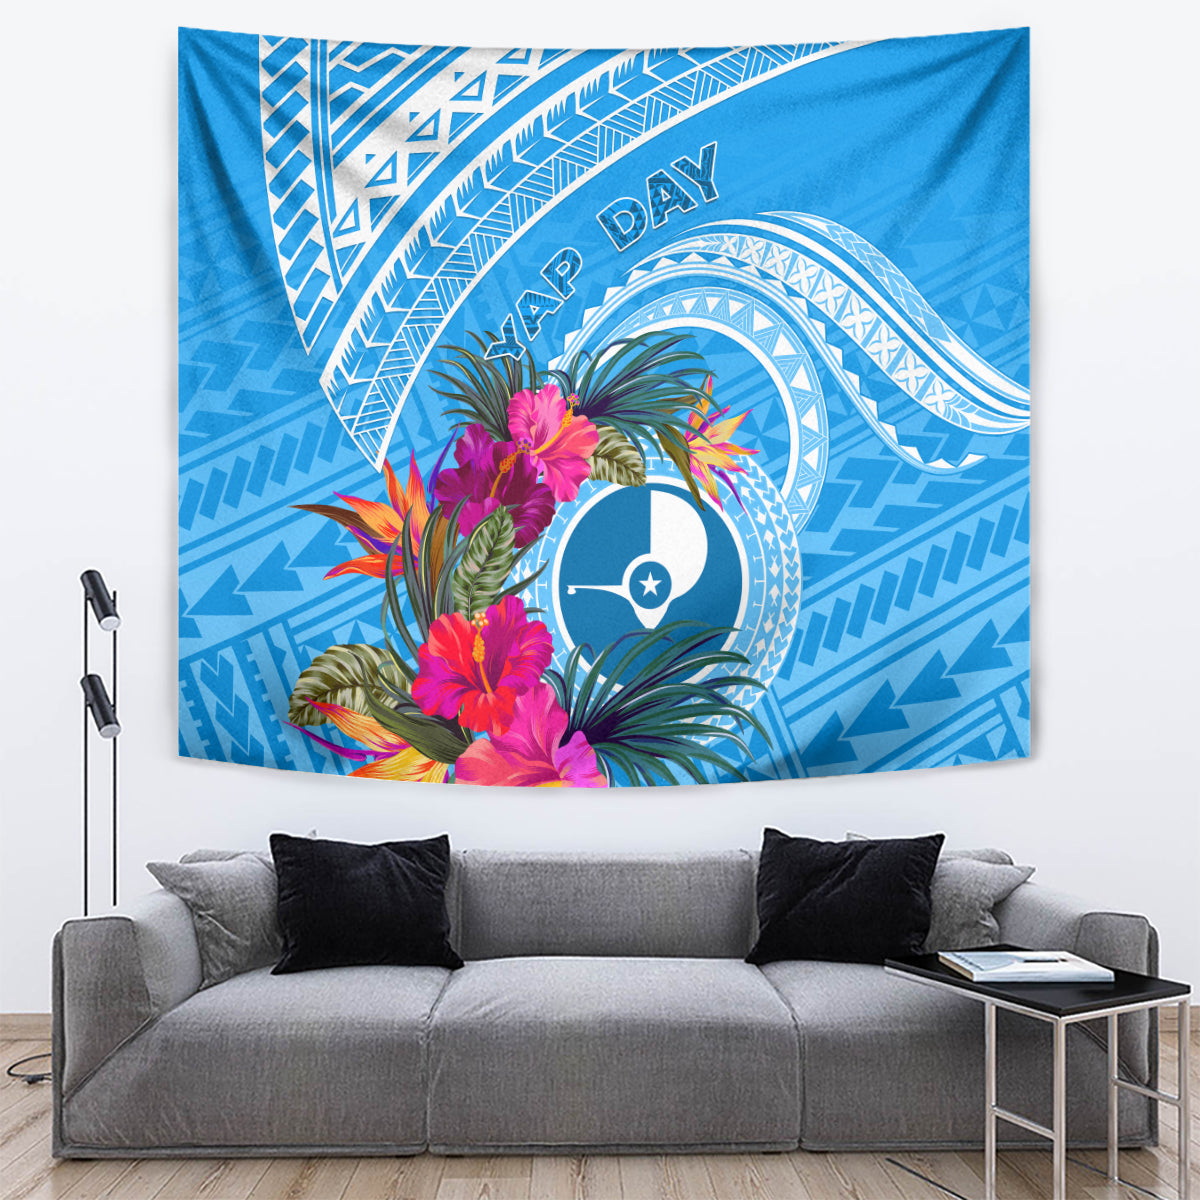 Yap Day Tapestry Nam nu Waqab Tropical Flower